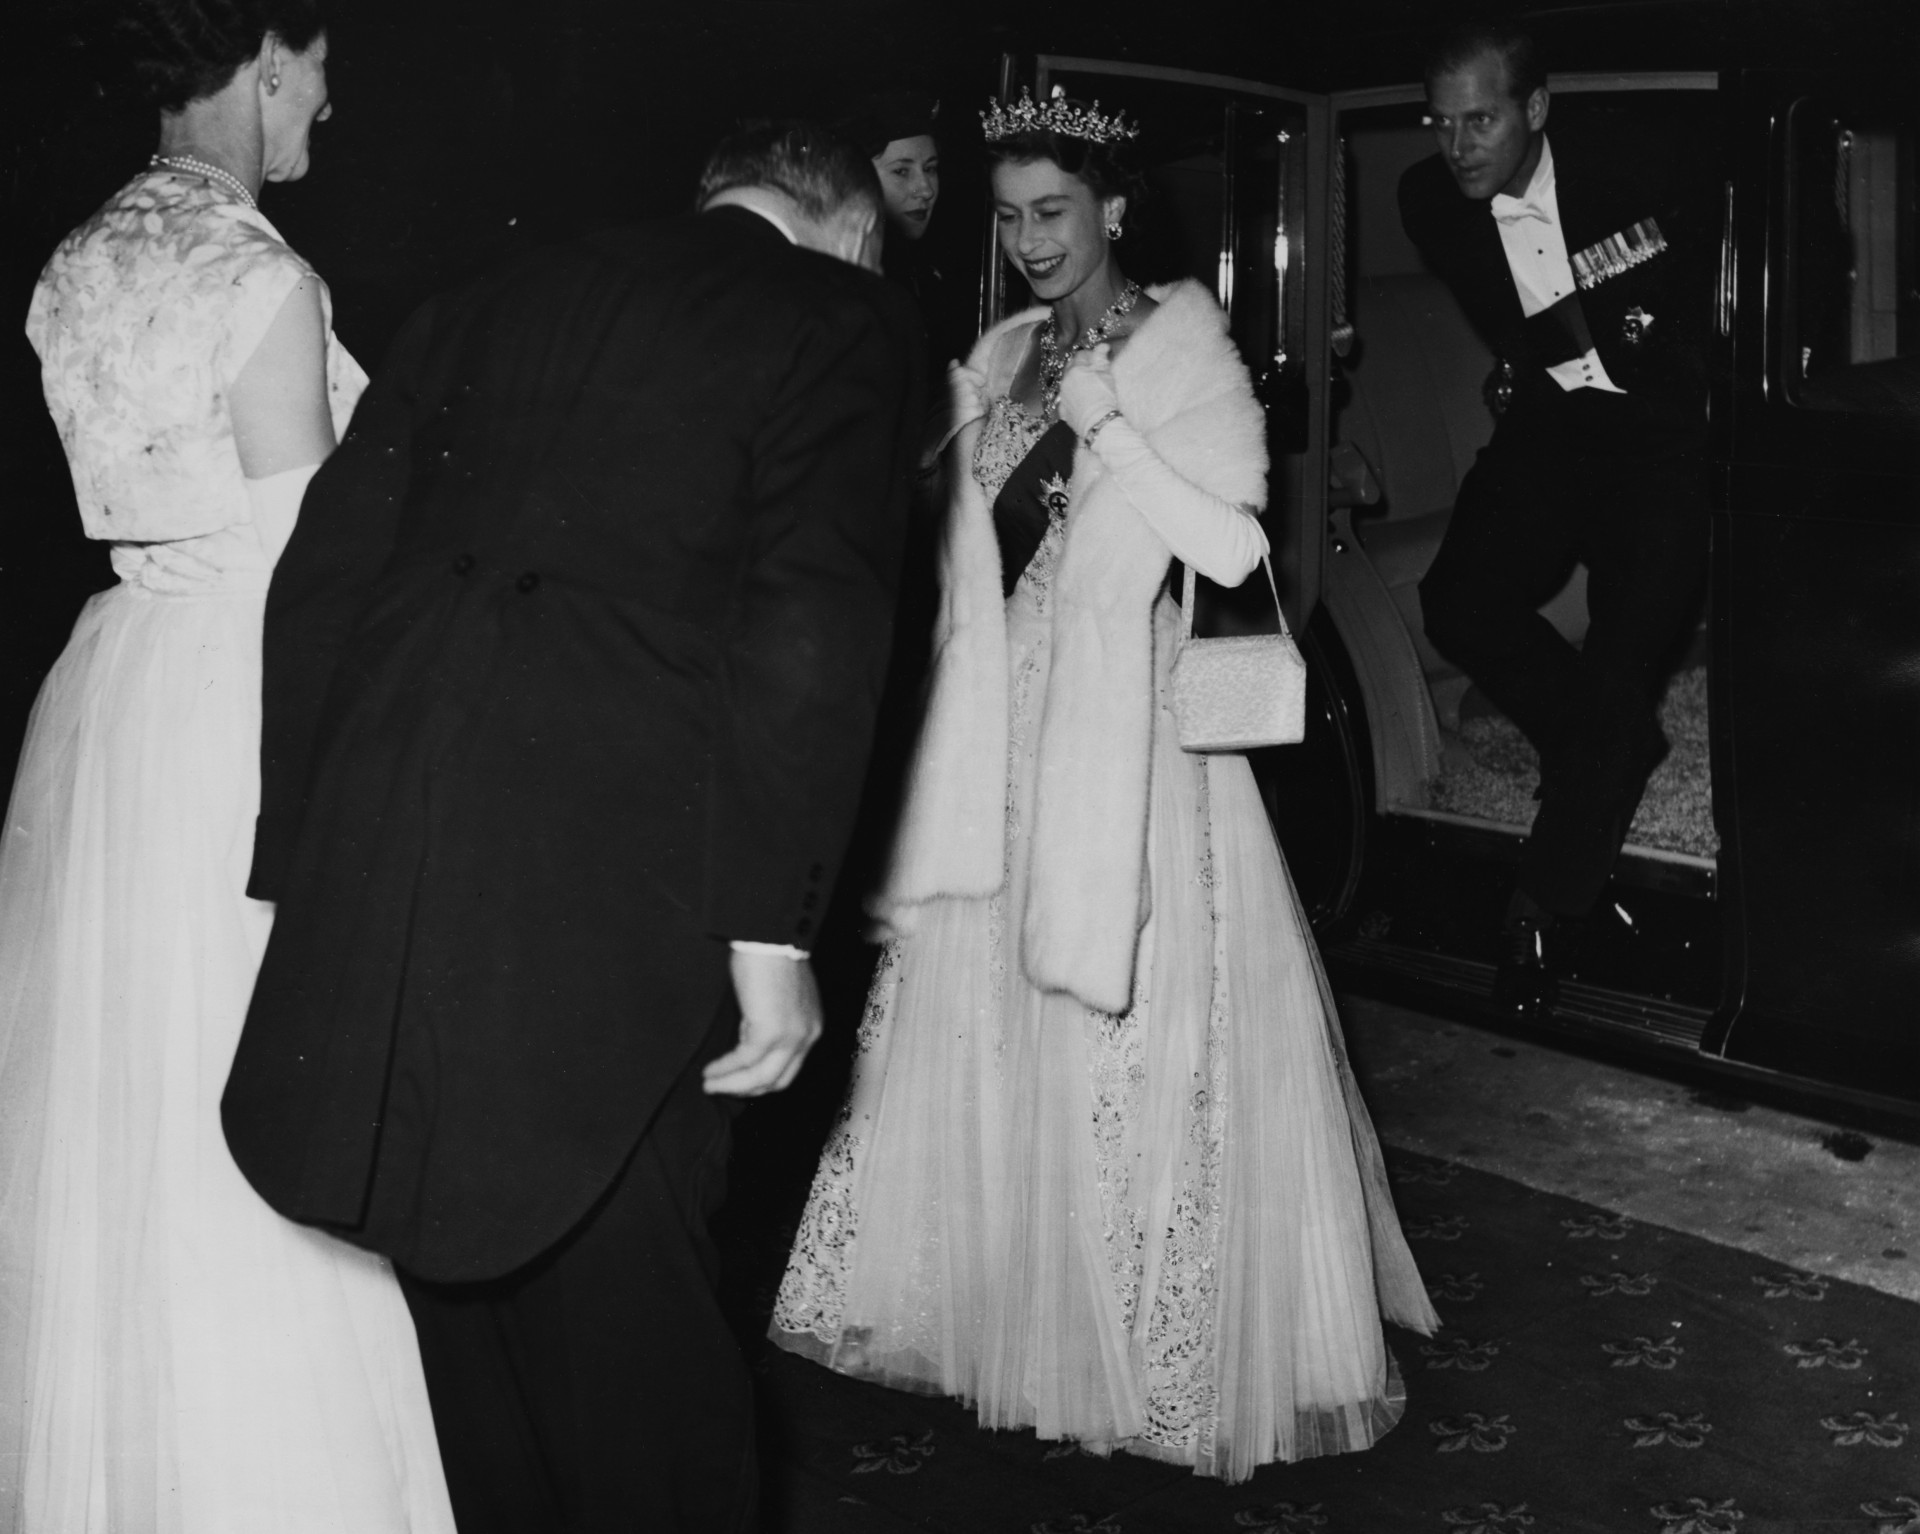 The royals are greeted by Hon T Playford and his wife on their arrival at Parliament House for a State Banquet in Australia.<p><a href="https://www.msn.com/en-nz/community/channel/vid-7xx8mnucu55yw63we9va2gwr7uihbxwc68fxqp25x6tg4ftibpra?cvid=94631541bc0f4f89bfd59158d696ad7e">Follow us and access great exclusive content every day</a></p>